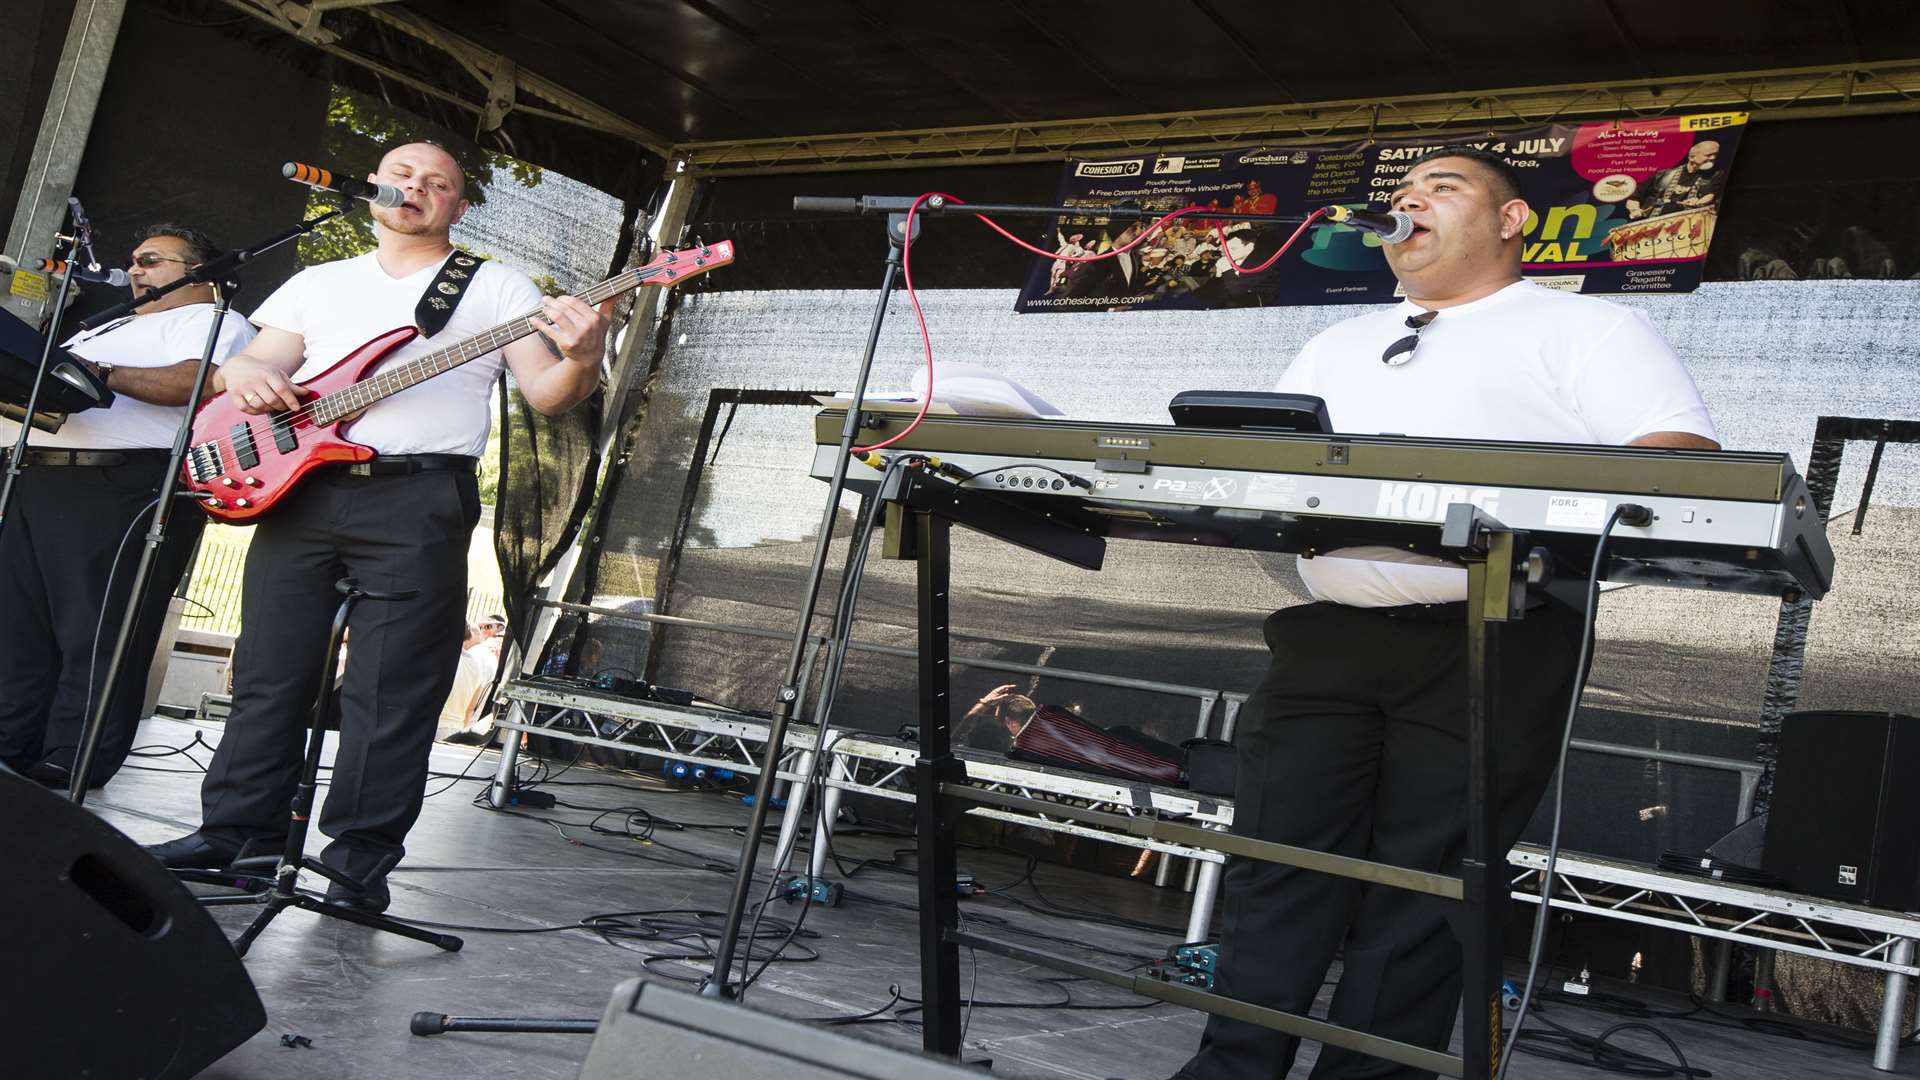 Music act What perform on stage for Gravesend Fusion Festival